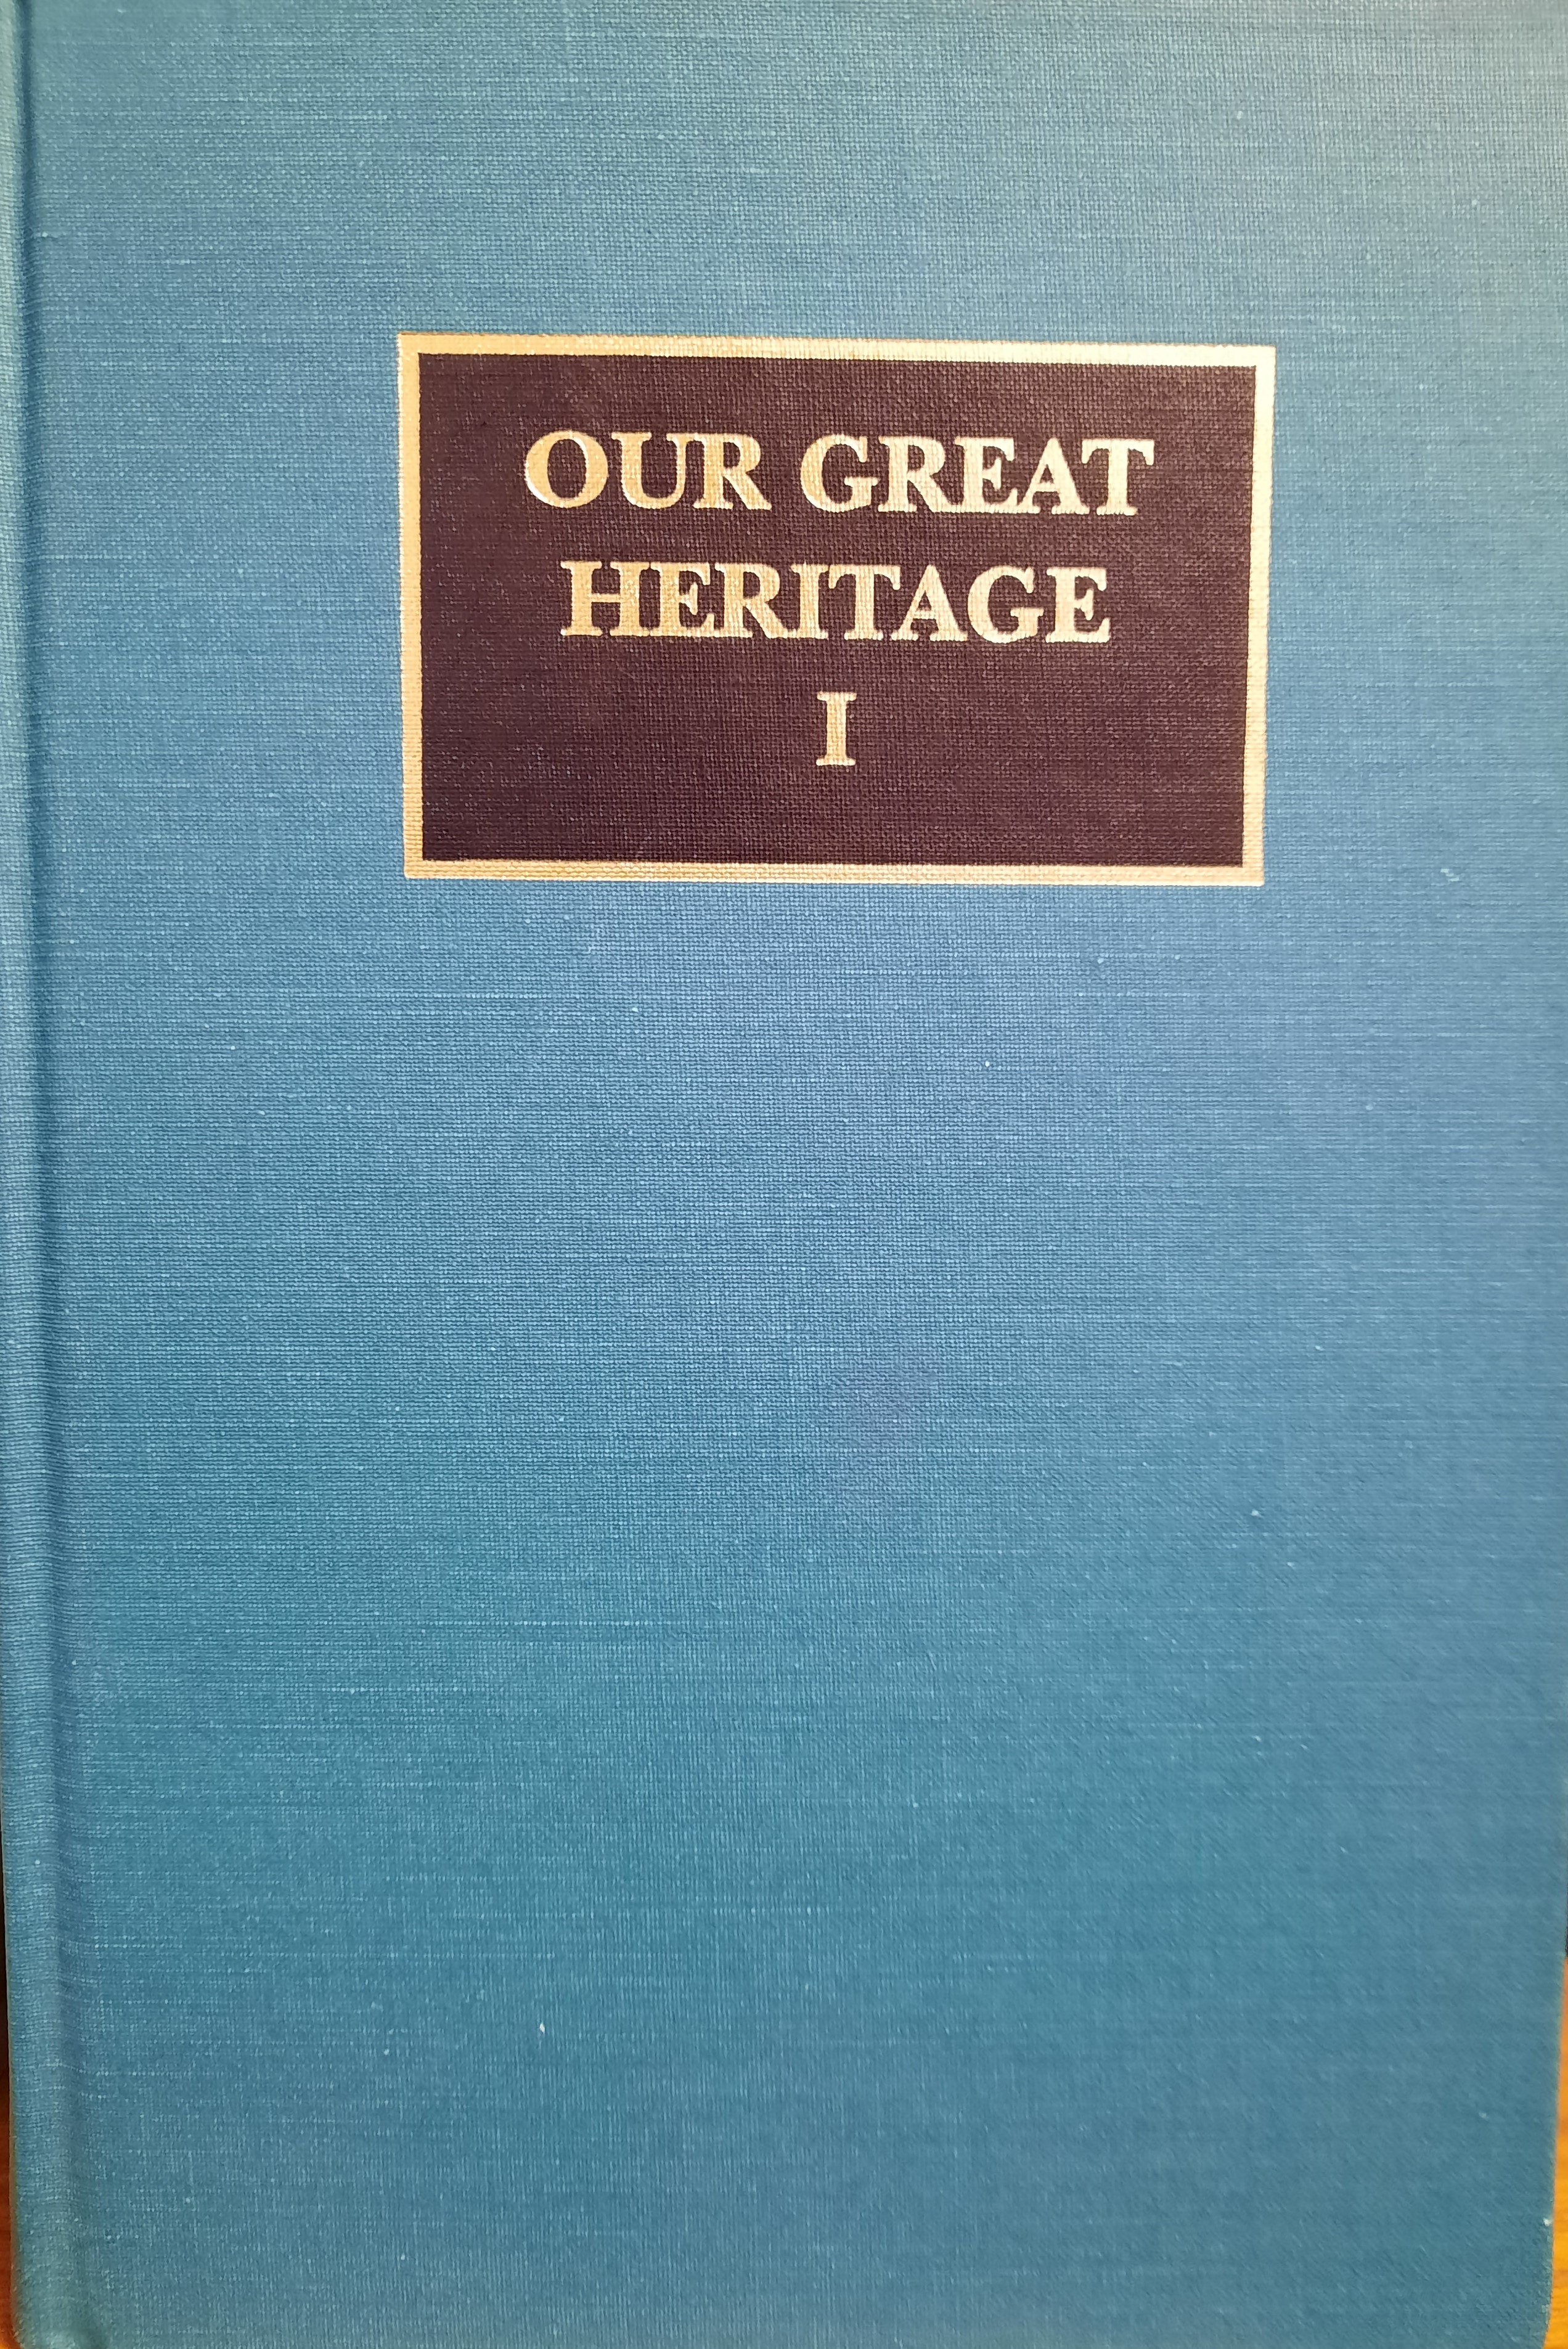 Our Great Heritage Vol. 1